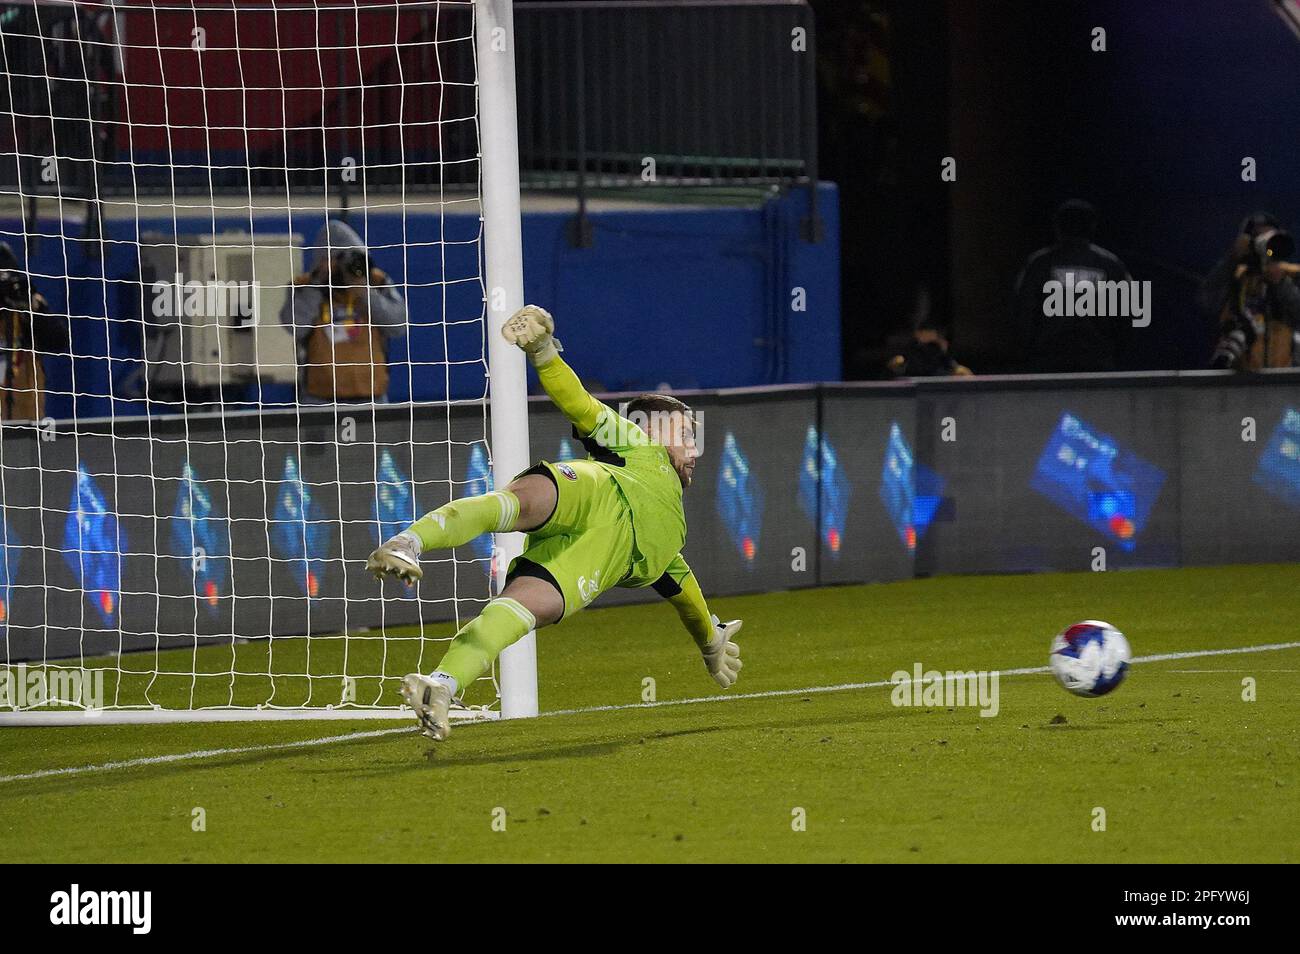 Frisco, United States. 18th Mar, 2023. March 18, 2023, Frisco, United States: FC Dallas goalkeeper Maarten Paes stops a penalty kick during second half action of the MLS game between FC Dallas and Sporting KC at Toyota Stadium on March 18, 2023 in Frisco, Texas. (Photo by Javier Vicencio/ Credit: Eyepix Group/Alamy Live News Stock Photo